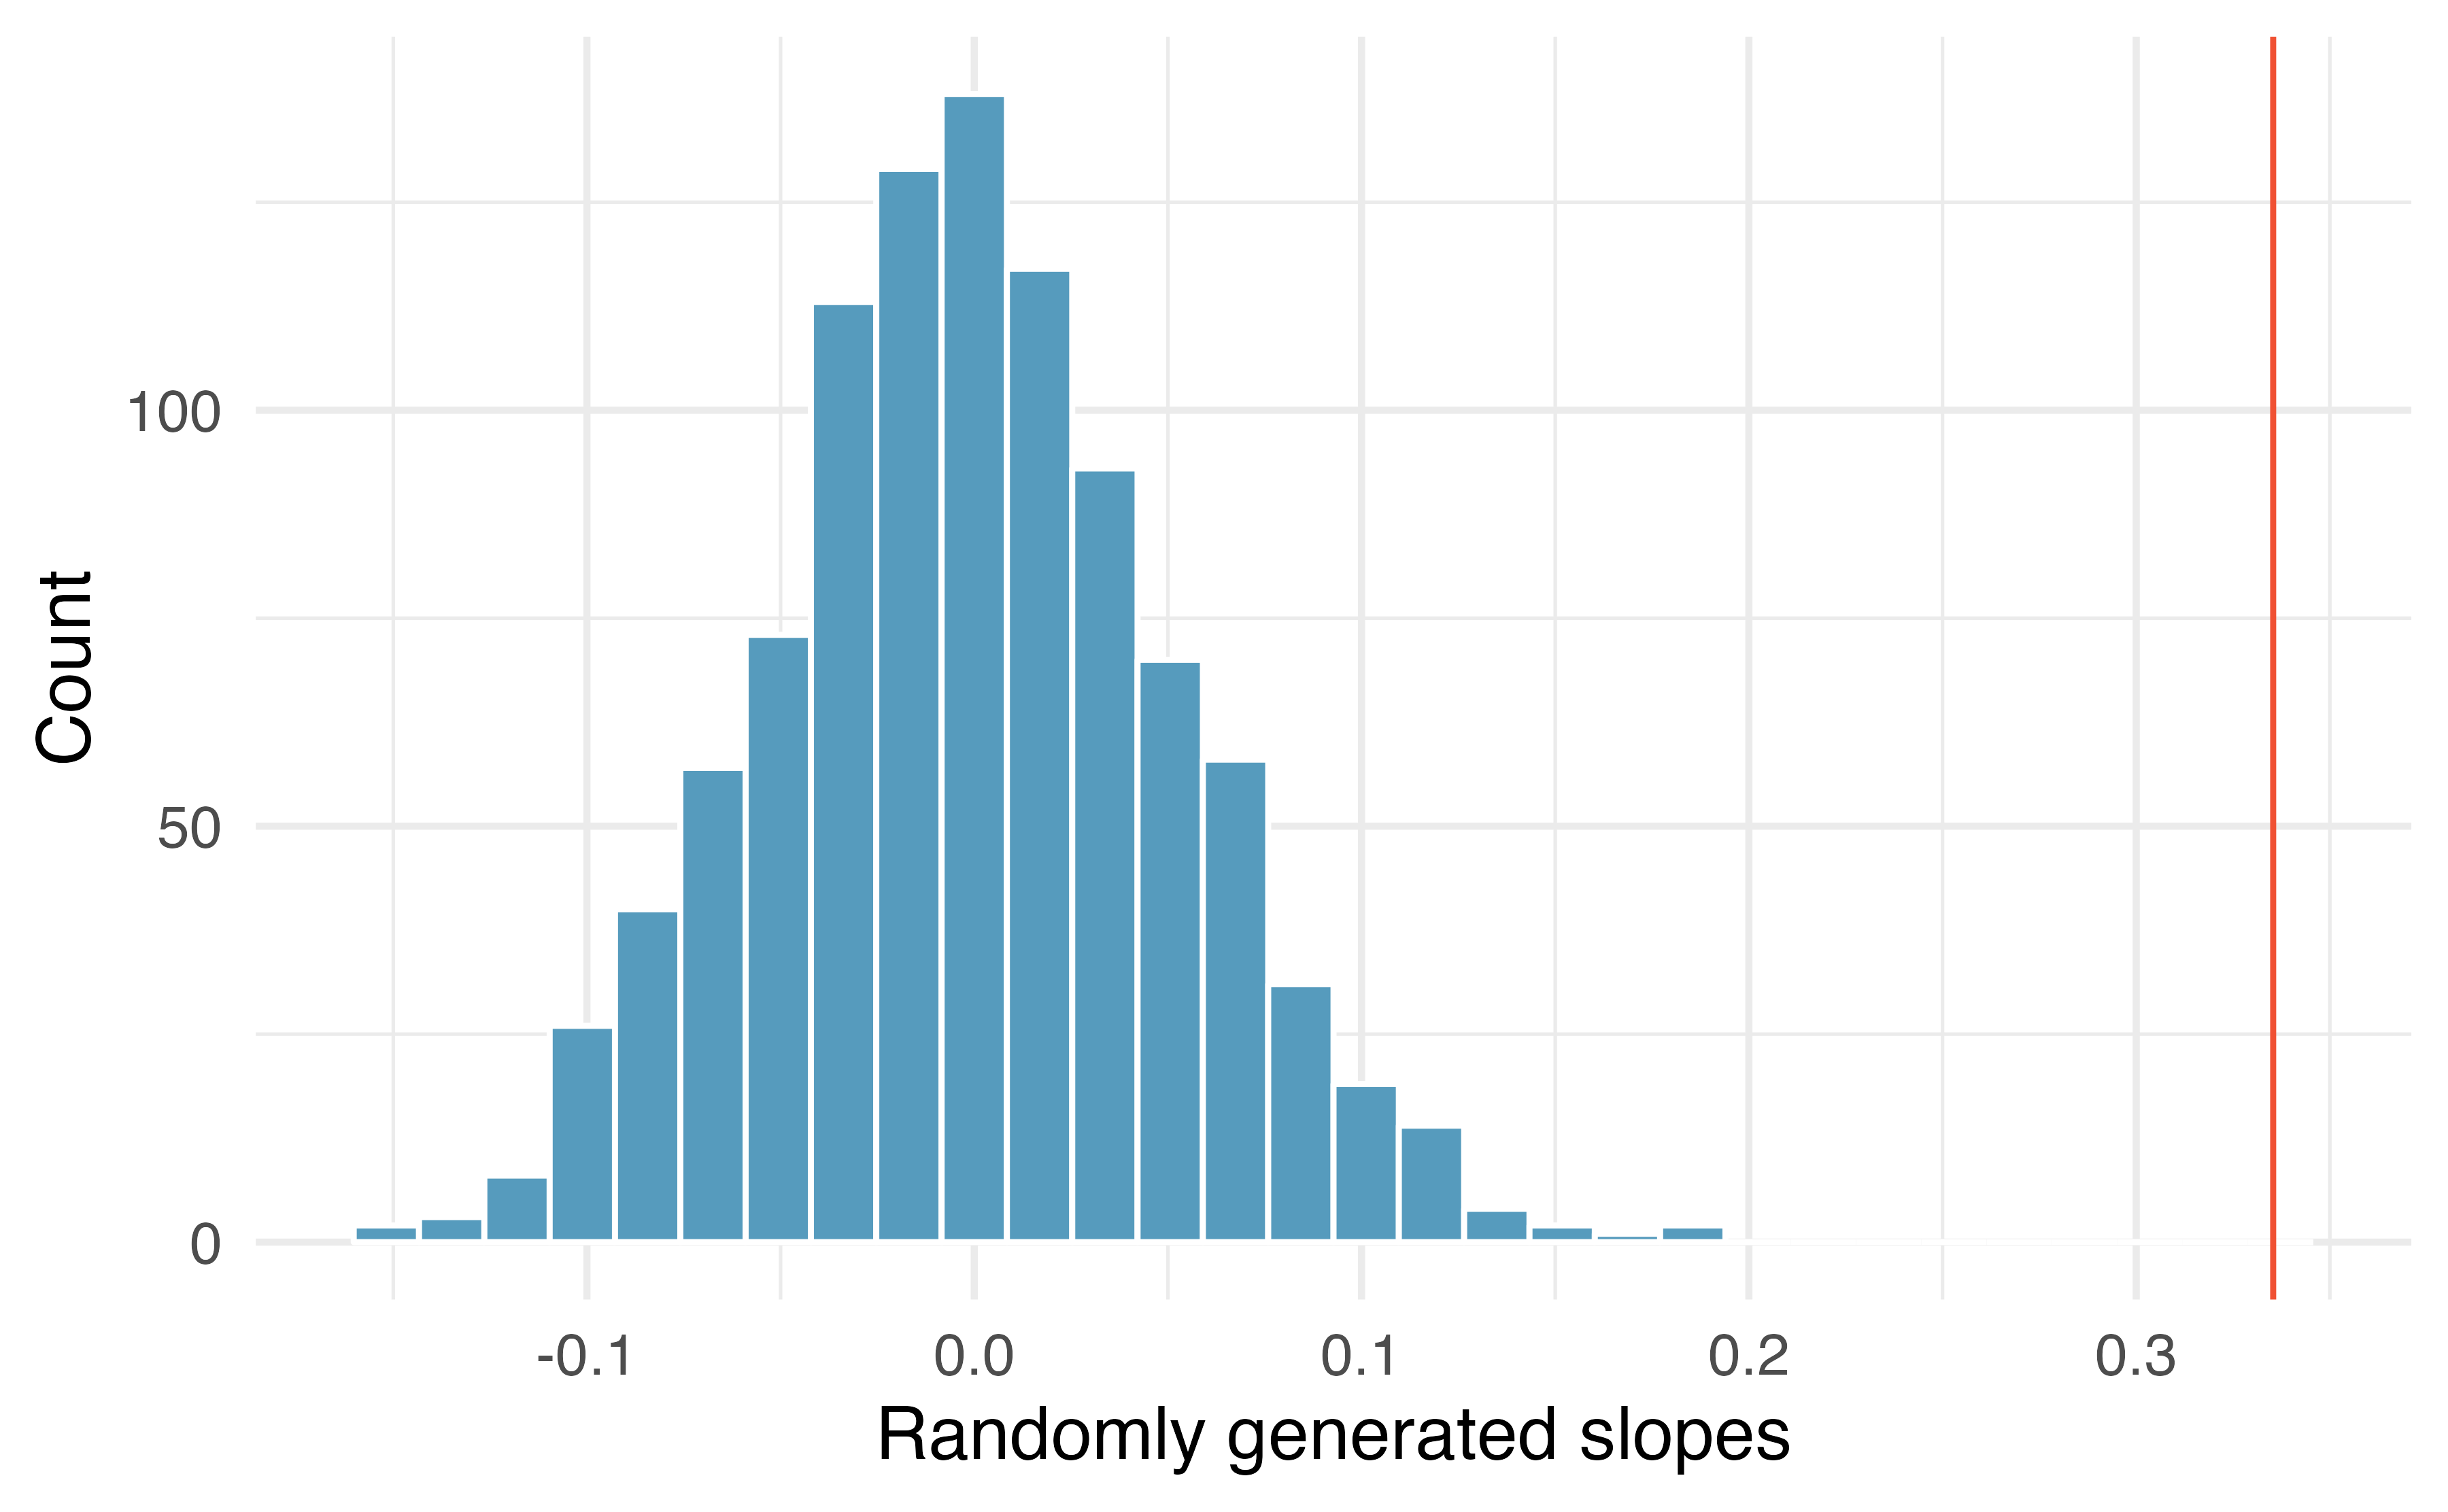 Histogram of slopes describing the linear model from permuted weight regressed on weeks gestation.  The permuted slopes range from -0.15 to +0.15 and are nowhere near the observed slope value of 0.335.